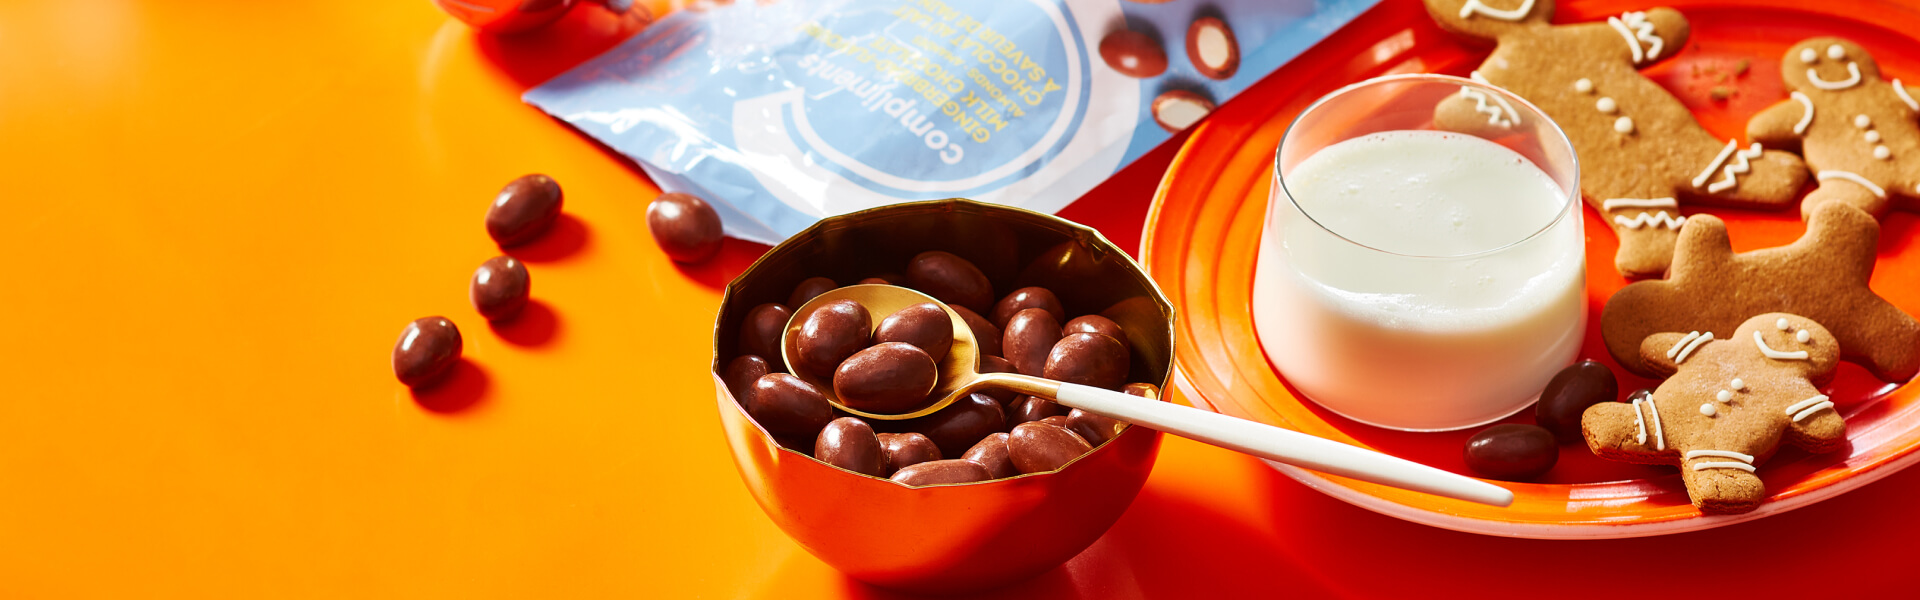 Orange surface with a package and bowl of gingerbread flavour milk chocolate coated almonds